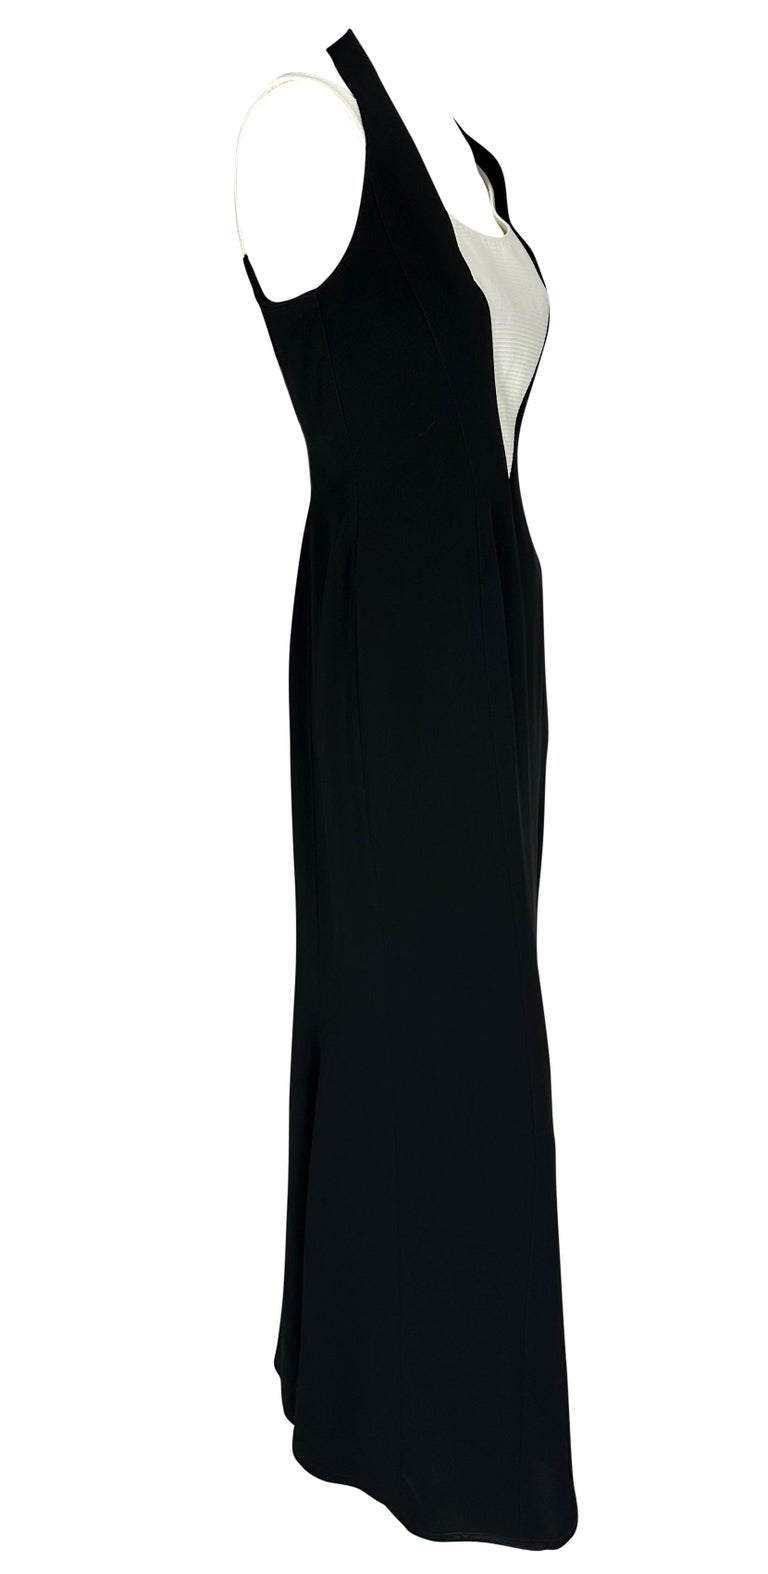 S/S 1999 Thierry Mugler Runway Black White Halter Cinched Flare Evening Gown For Sale 5